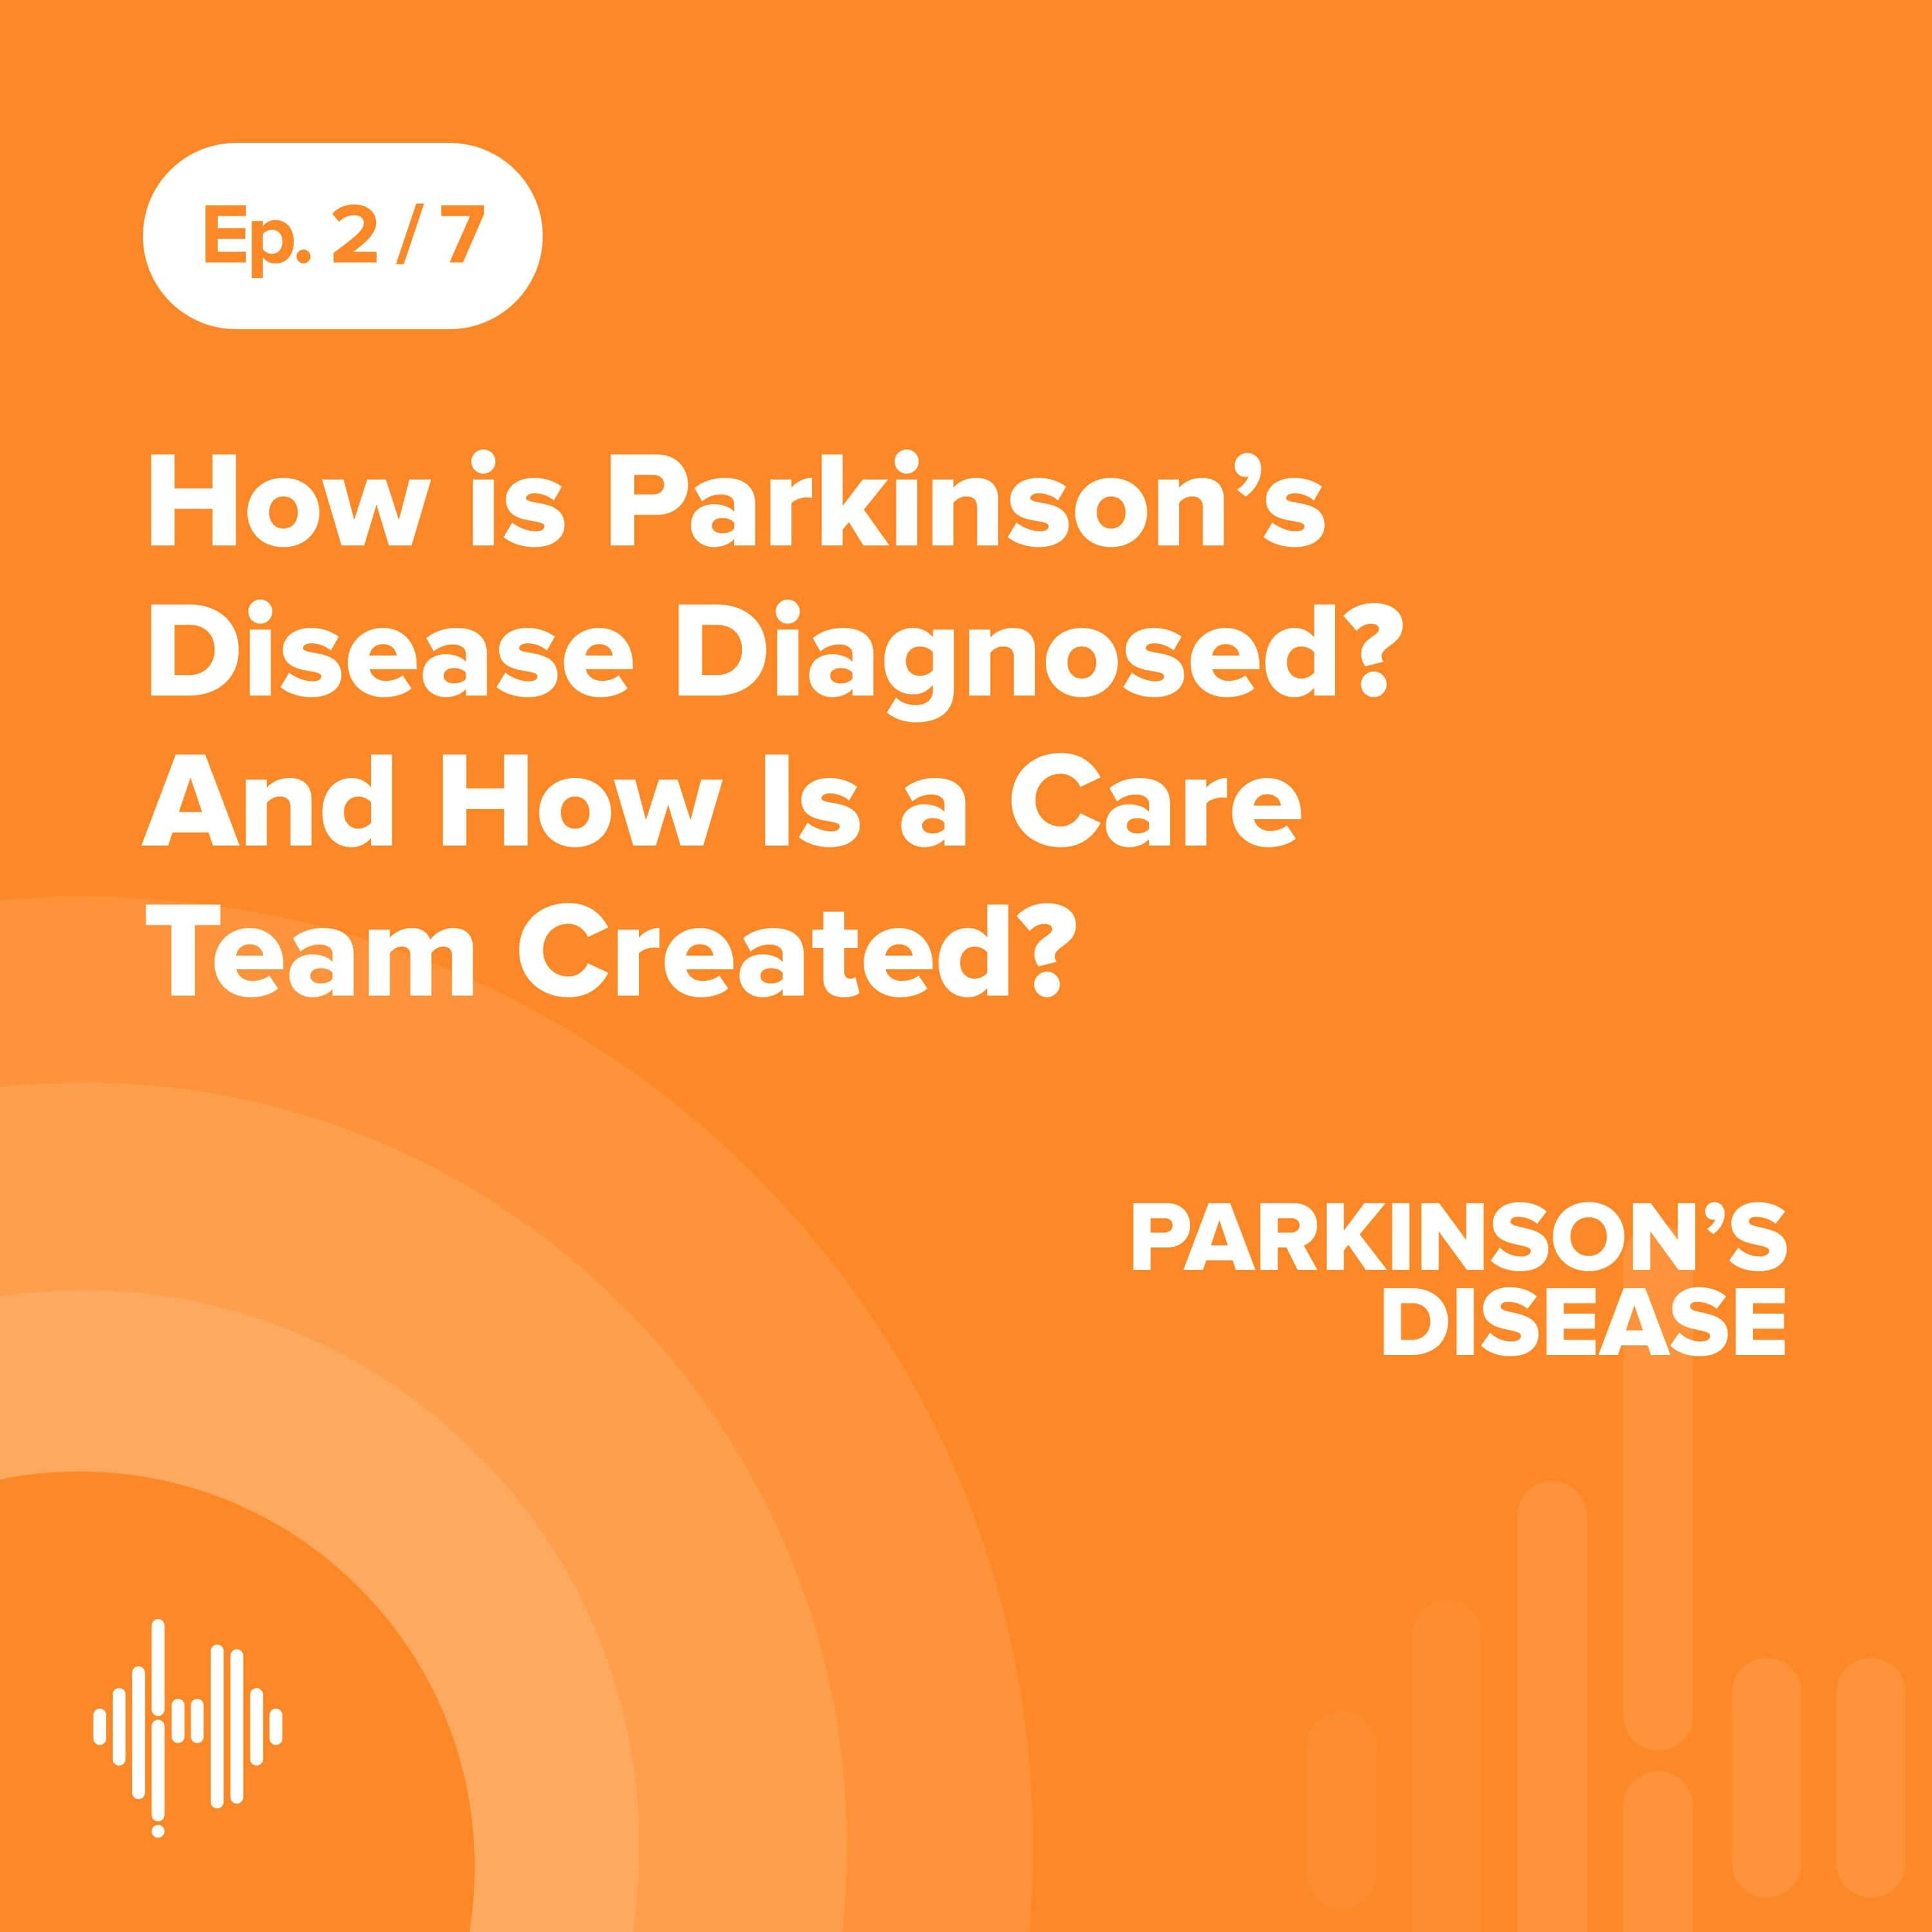 Ep 2: How Is Parkinson’s Disease Diagnosed? And How Is a Care Team Created?